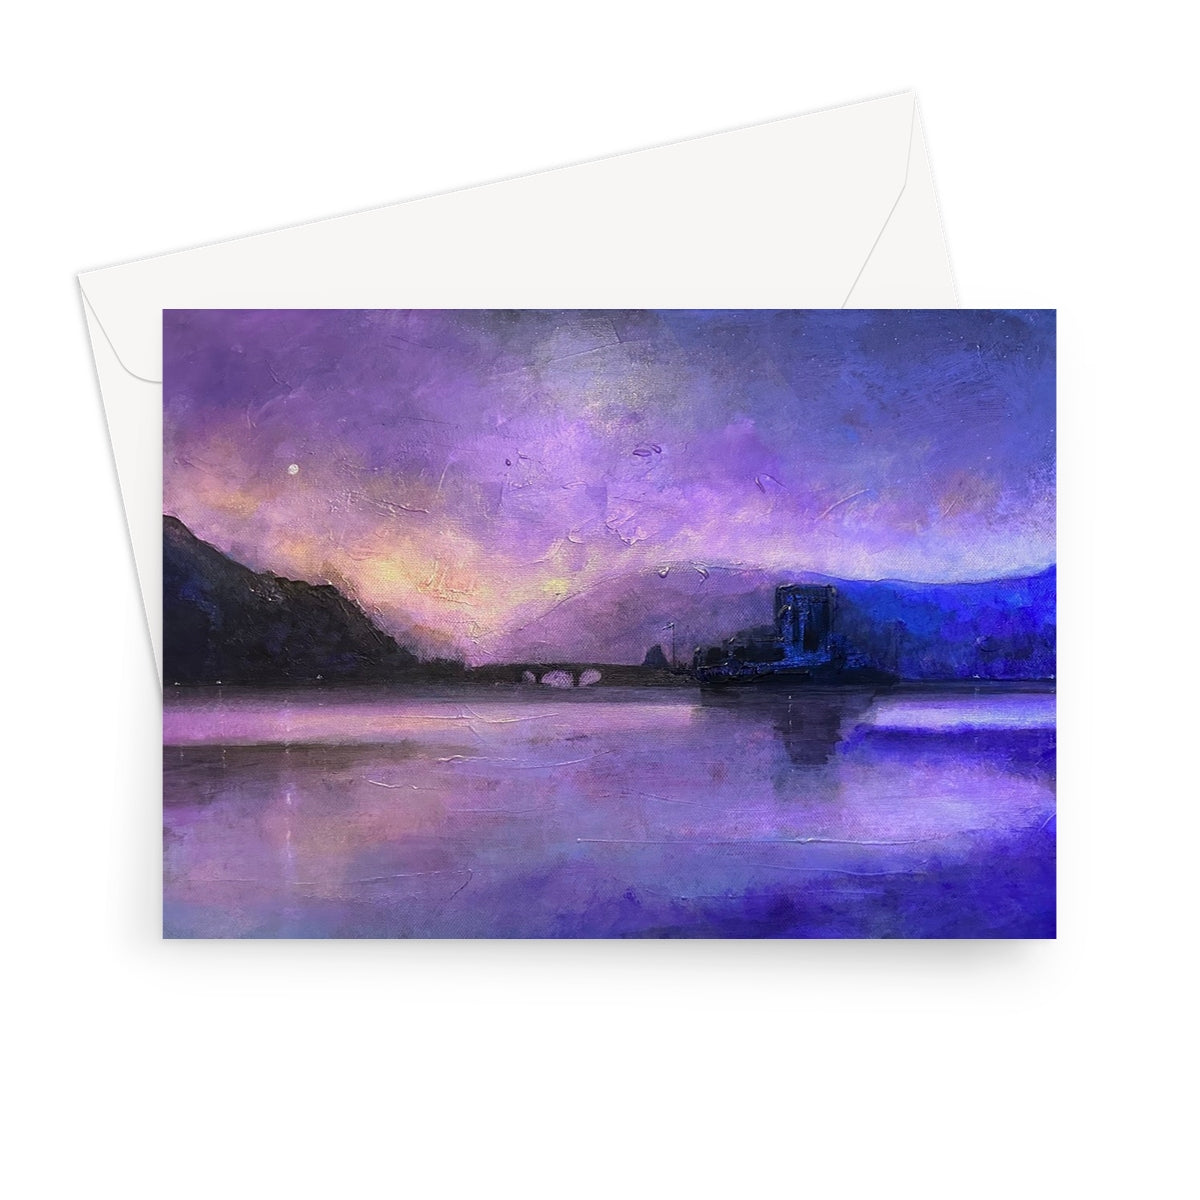 Eilean Donan Castle Moonset Art Gifts Greeting Card-Greetings Cards-Historic & Iconic Scotland Art Gallery-7"x5"-10 Cards-Paintings, Prints, Homeware, Art Gifts From Scotland By Scottish Artist Kevin Hunter